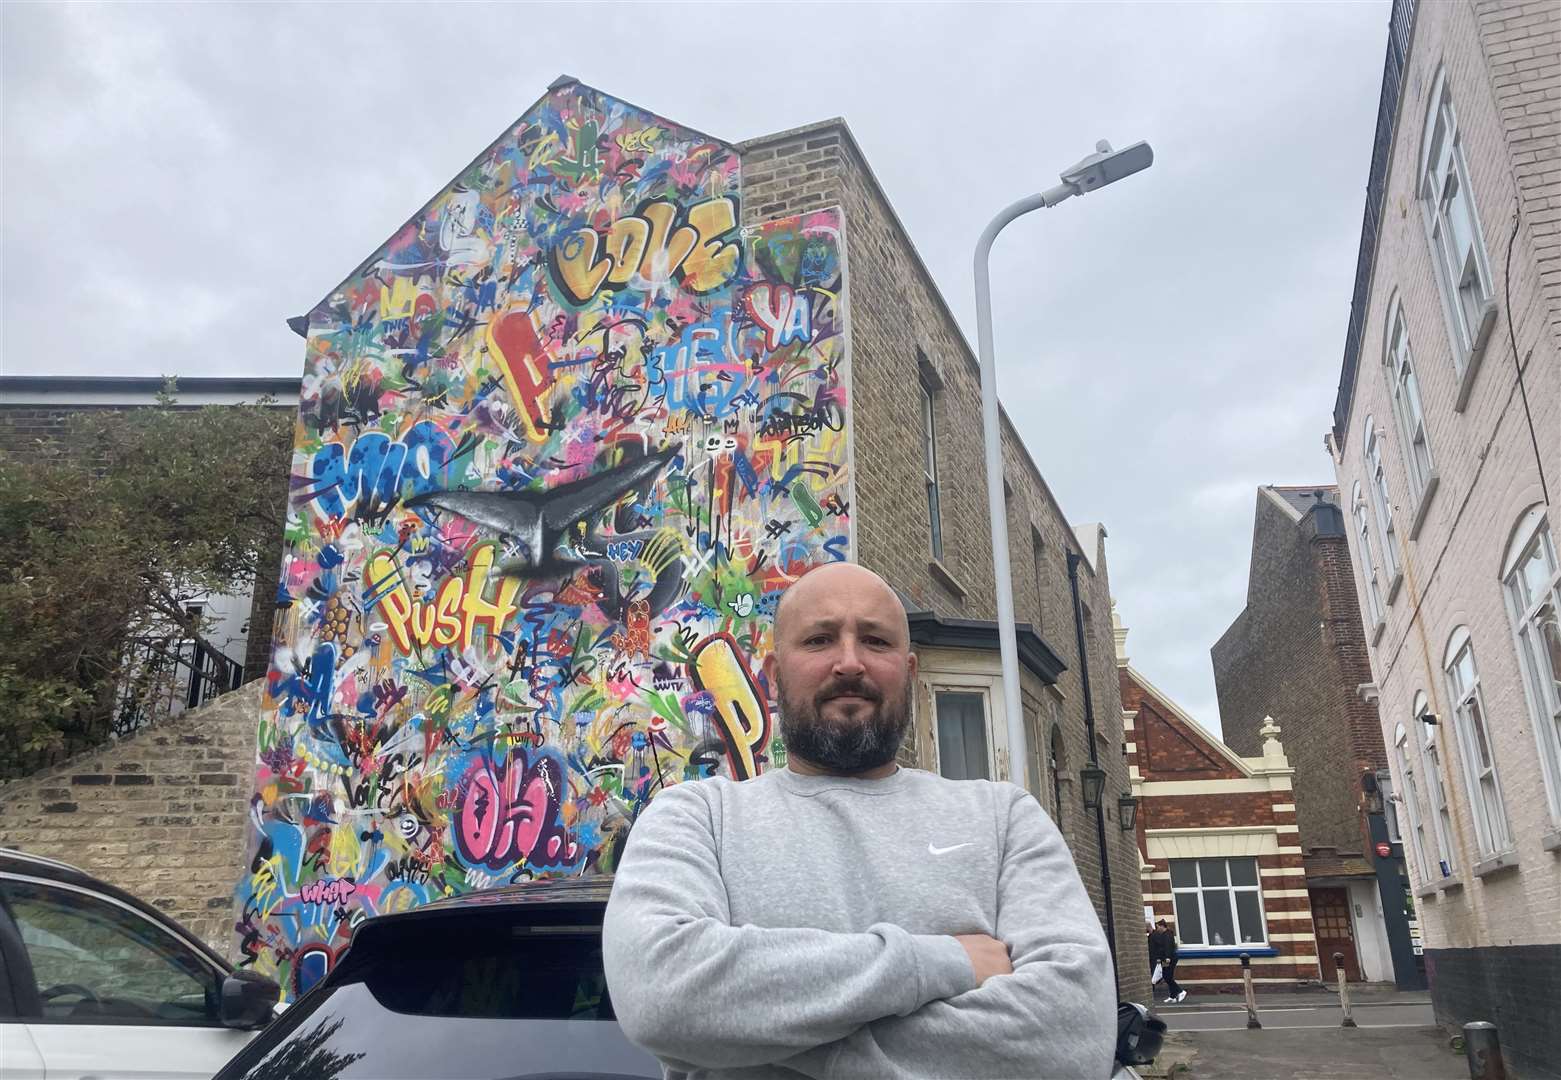 The mural in Caroline Square, Margate, has been described by resident Ian Argent as an "eyesore"